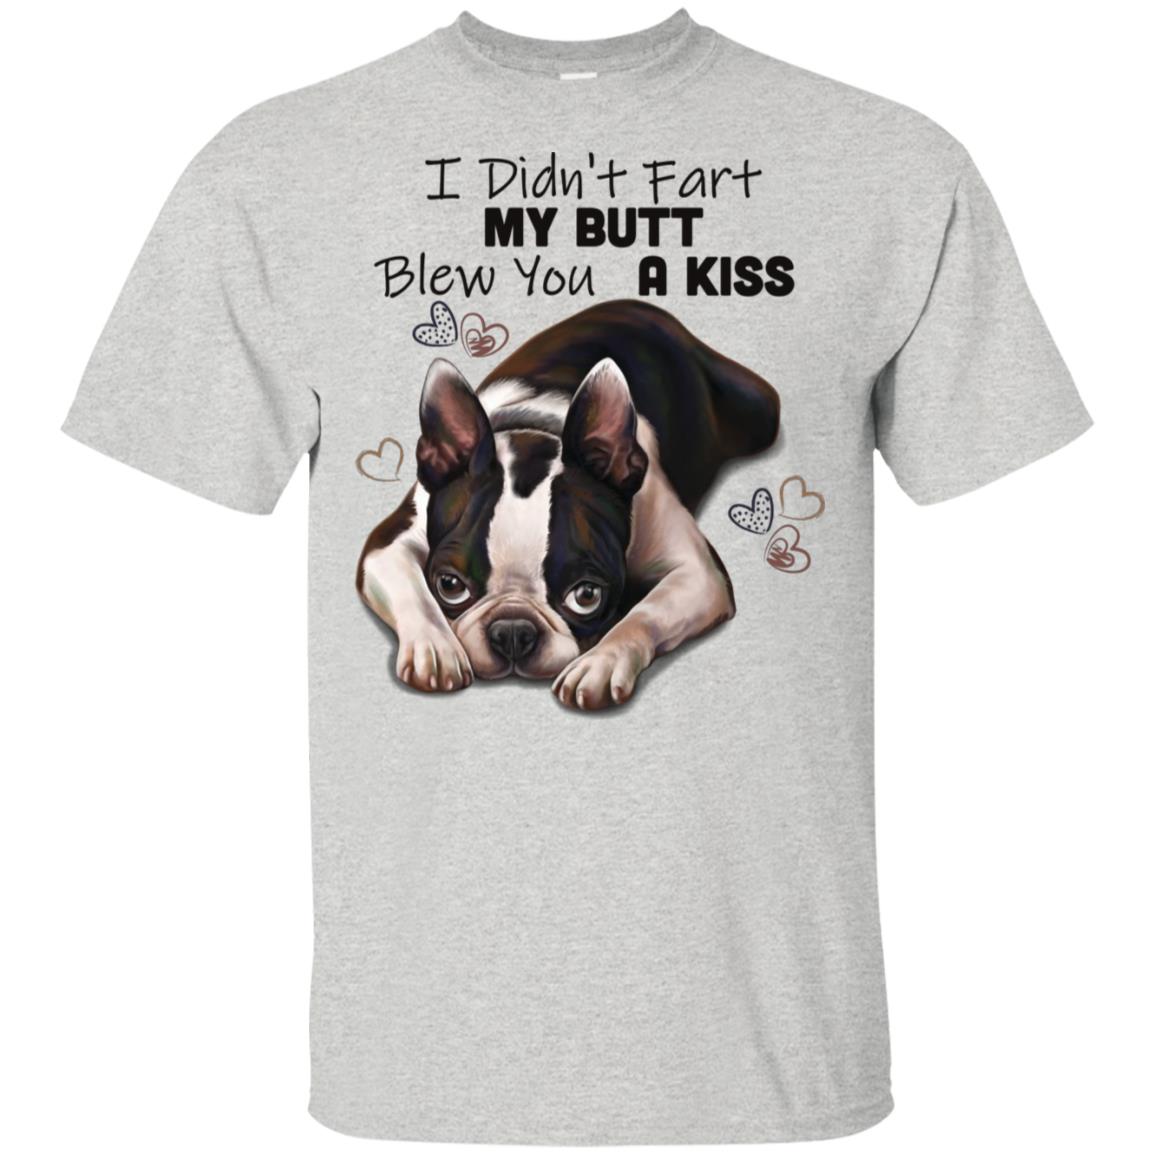 Boston Terrier T-Shirt, I Didn't Fart My Butt Blew You A Kiss, Funny shirt, Boston Terrier gift - GoneBold.gift